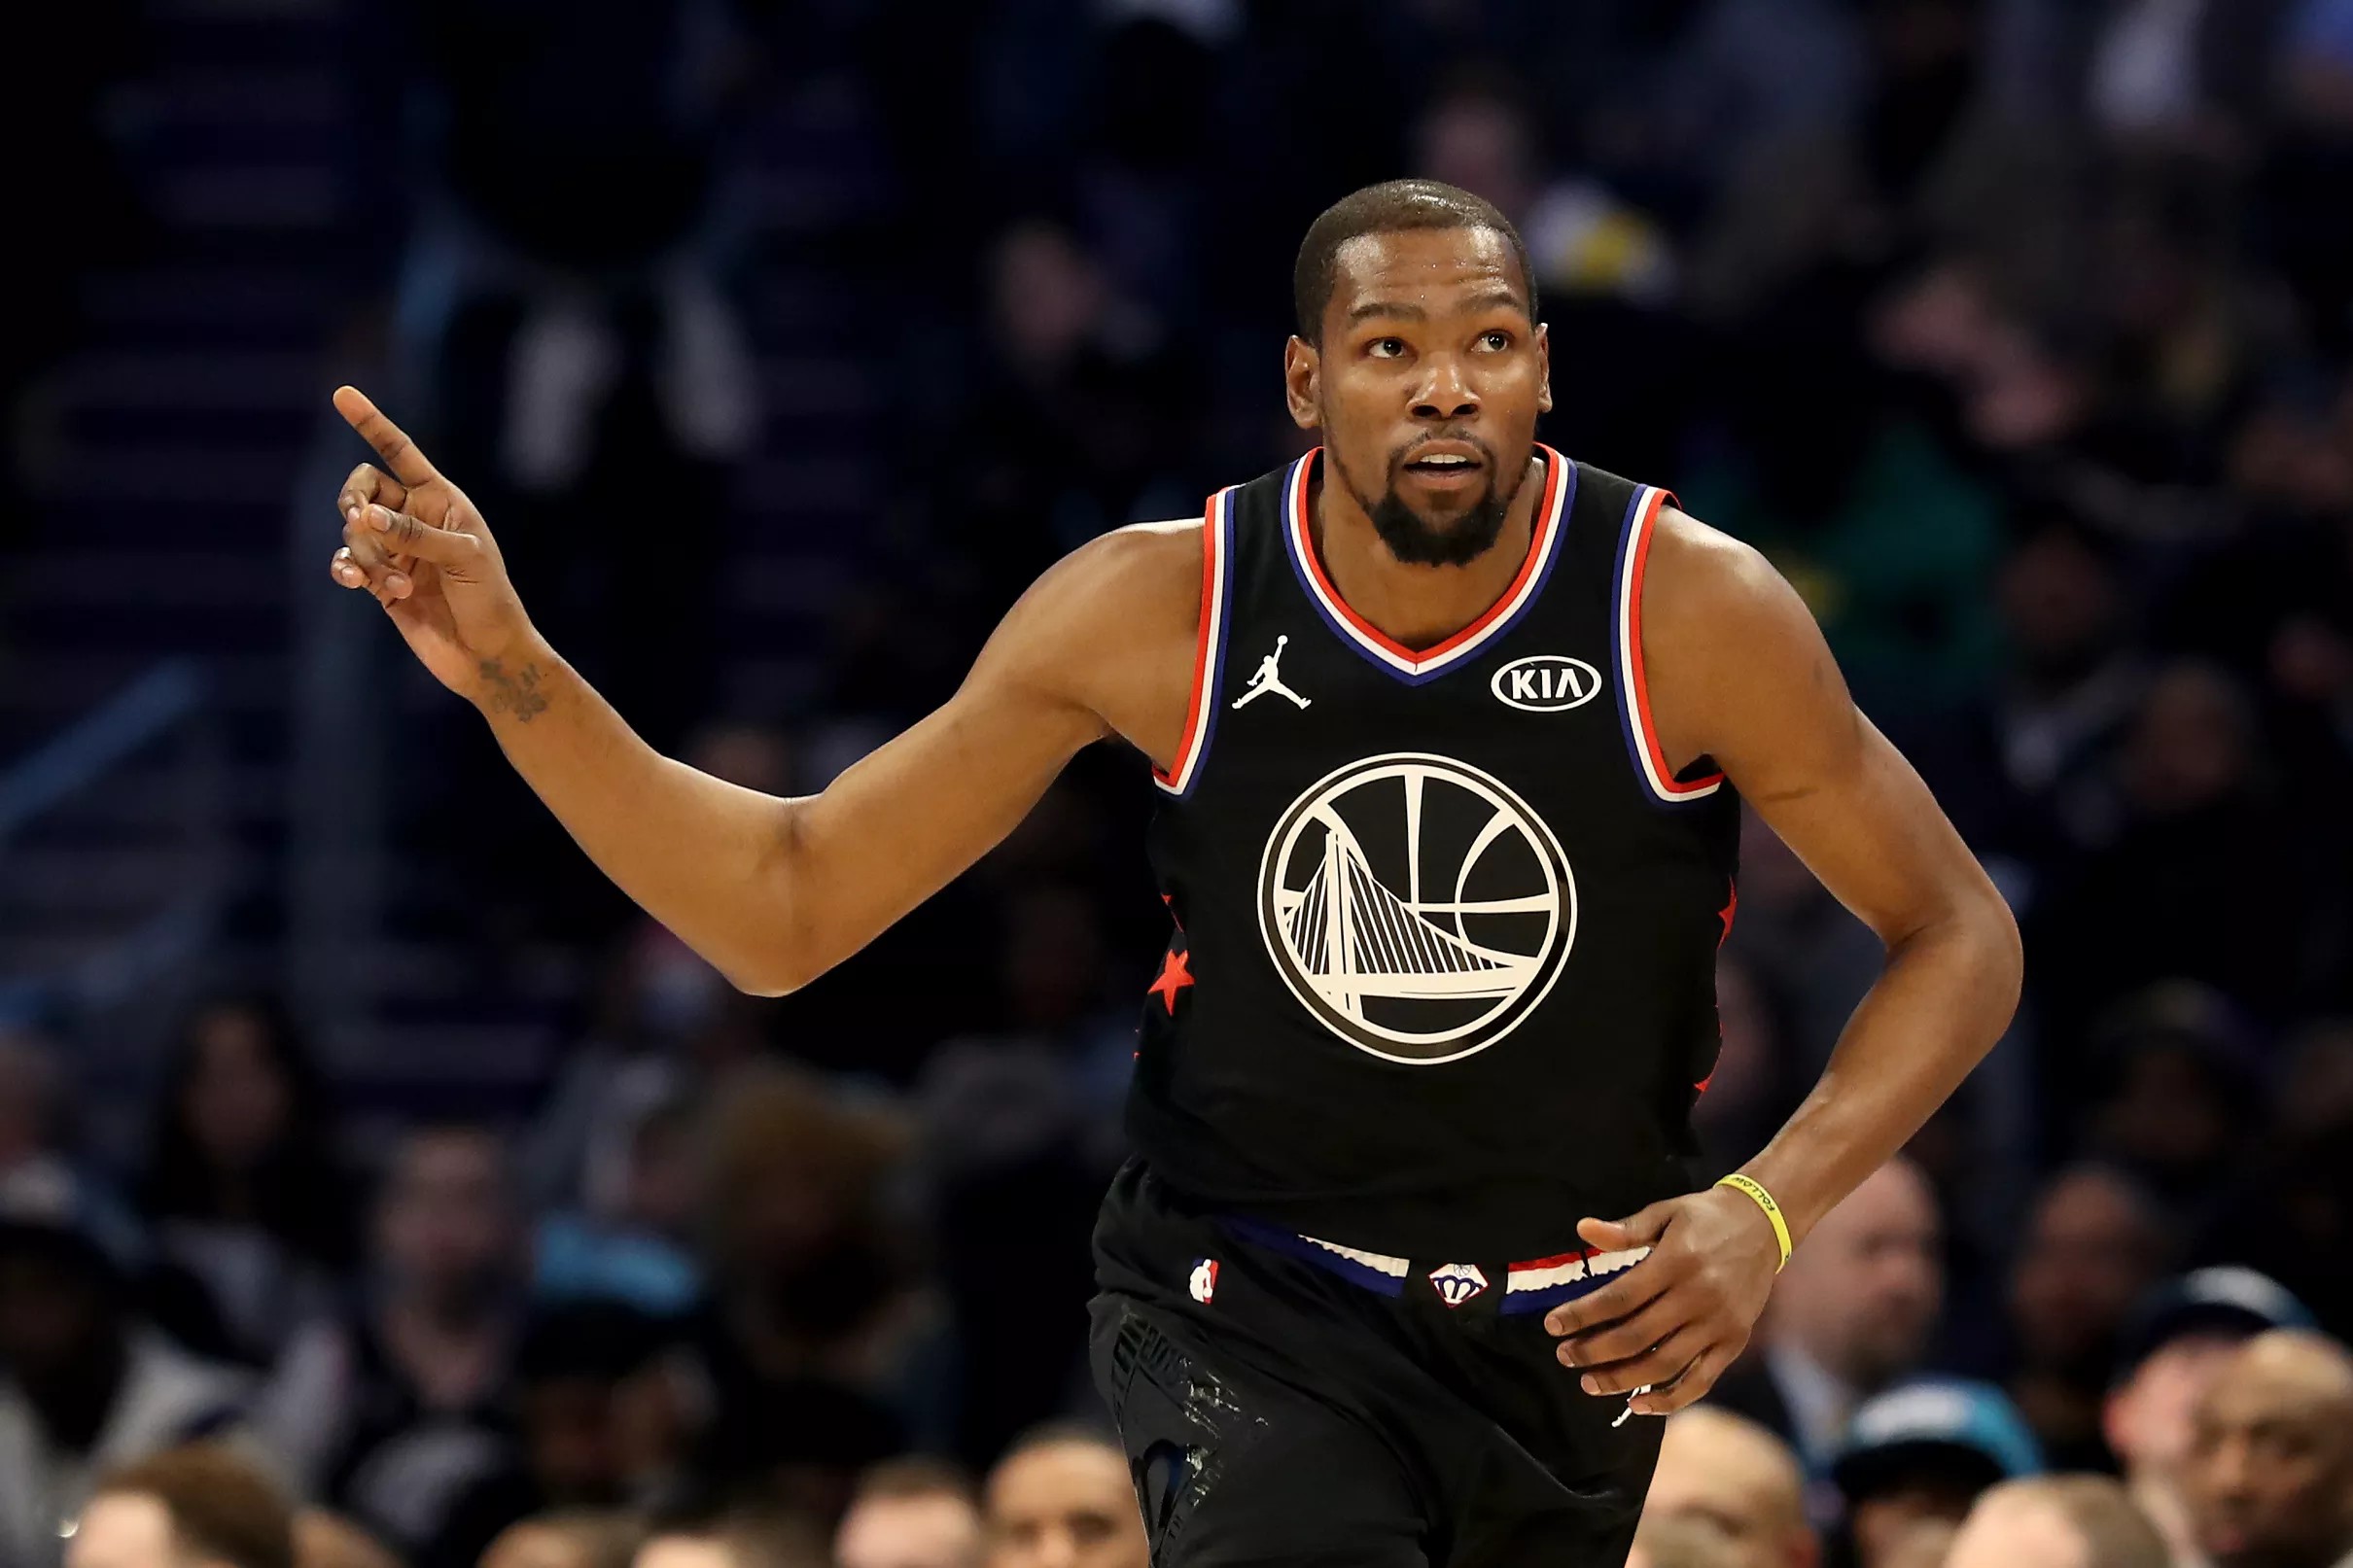 Warrior Wonder Kevin Durant was the brightest star in the 2019 All